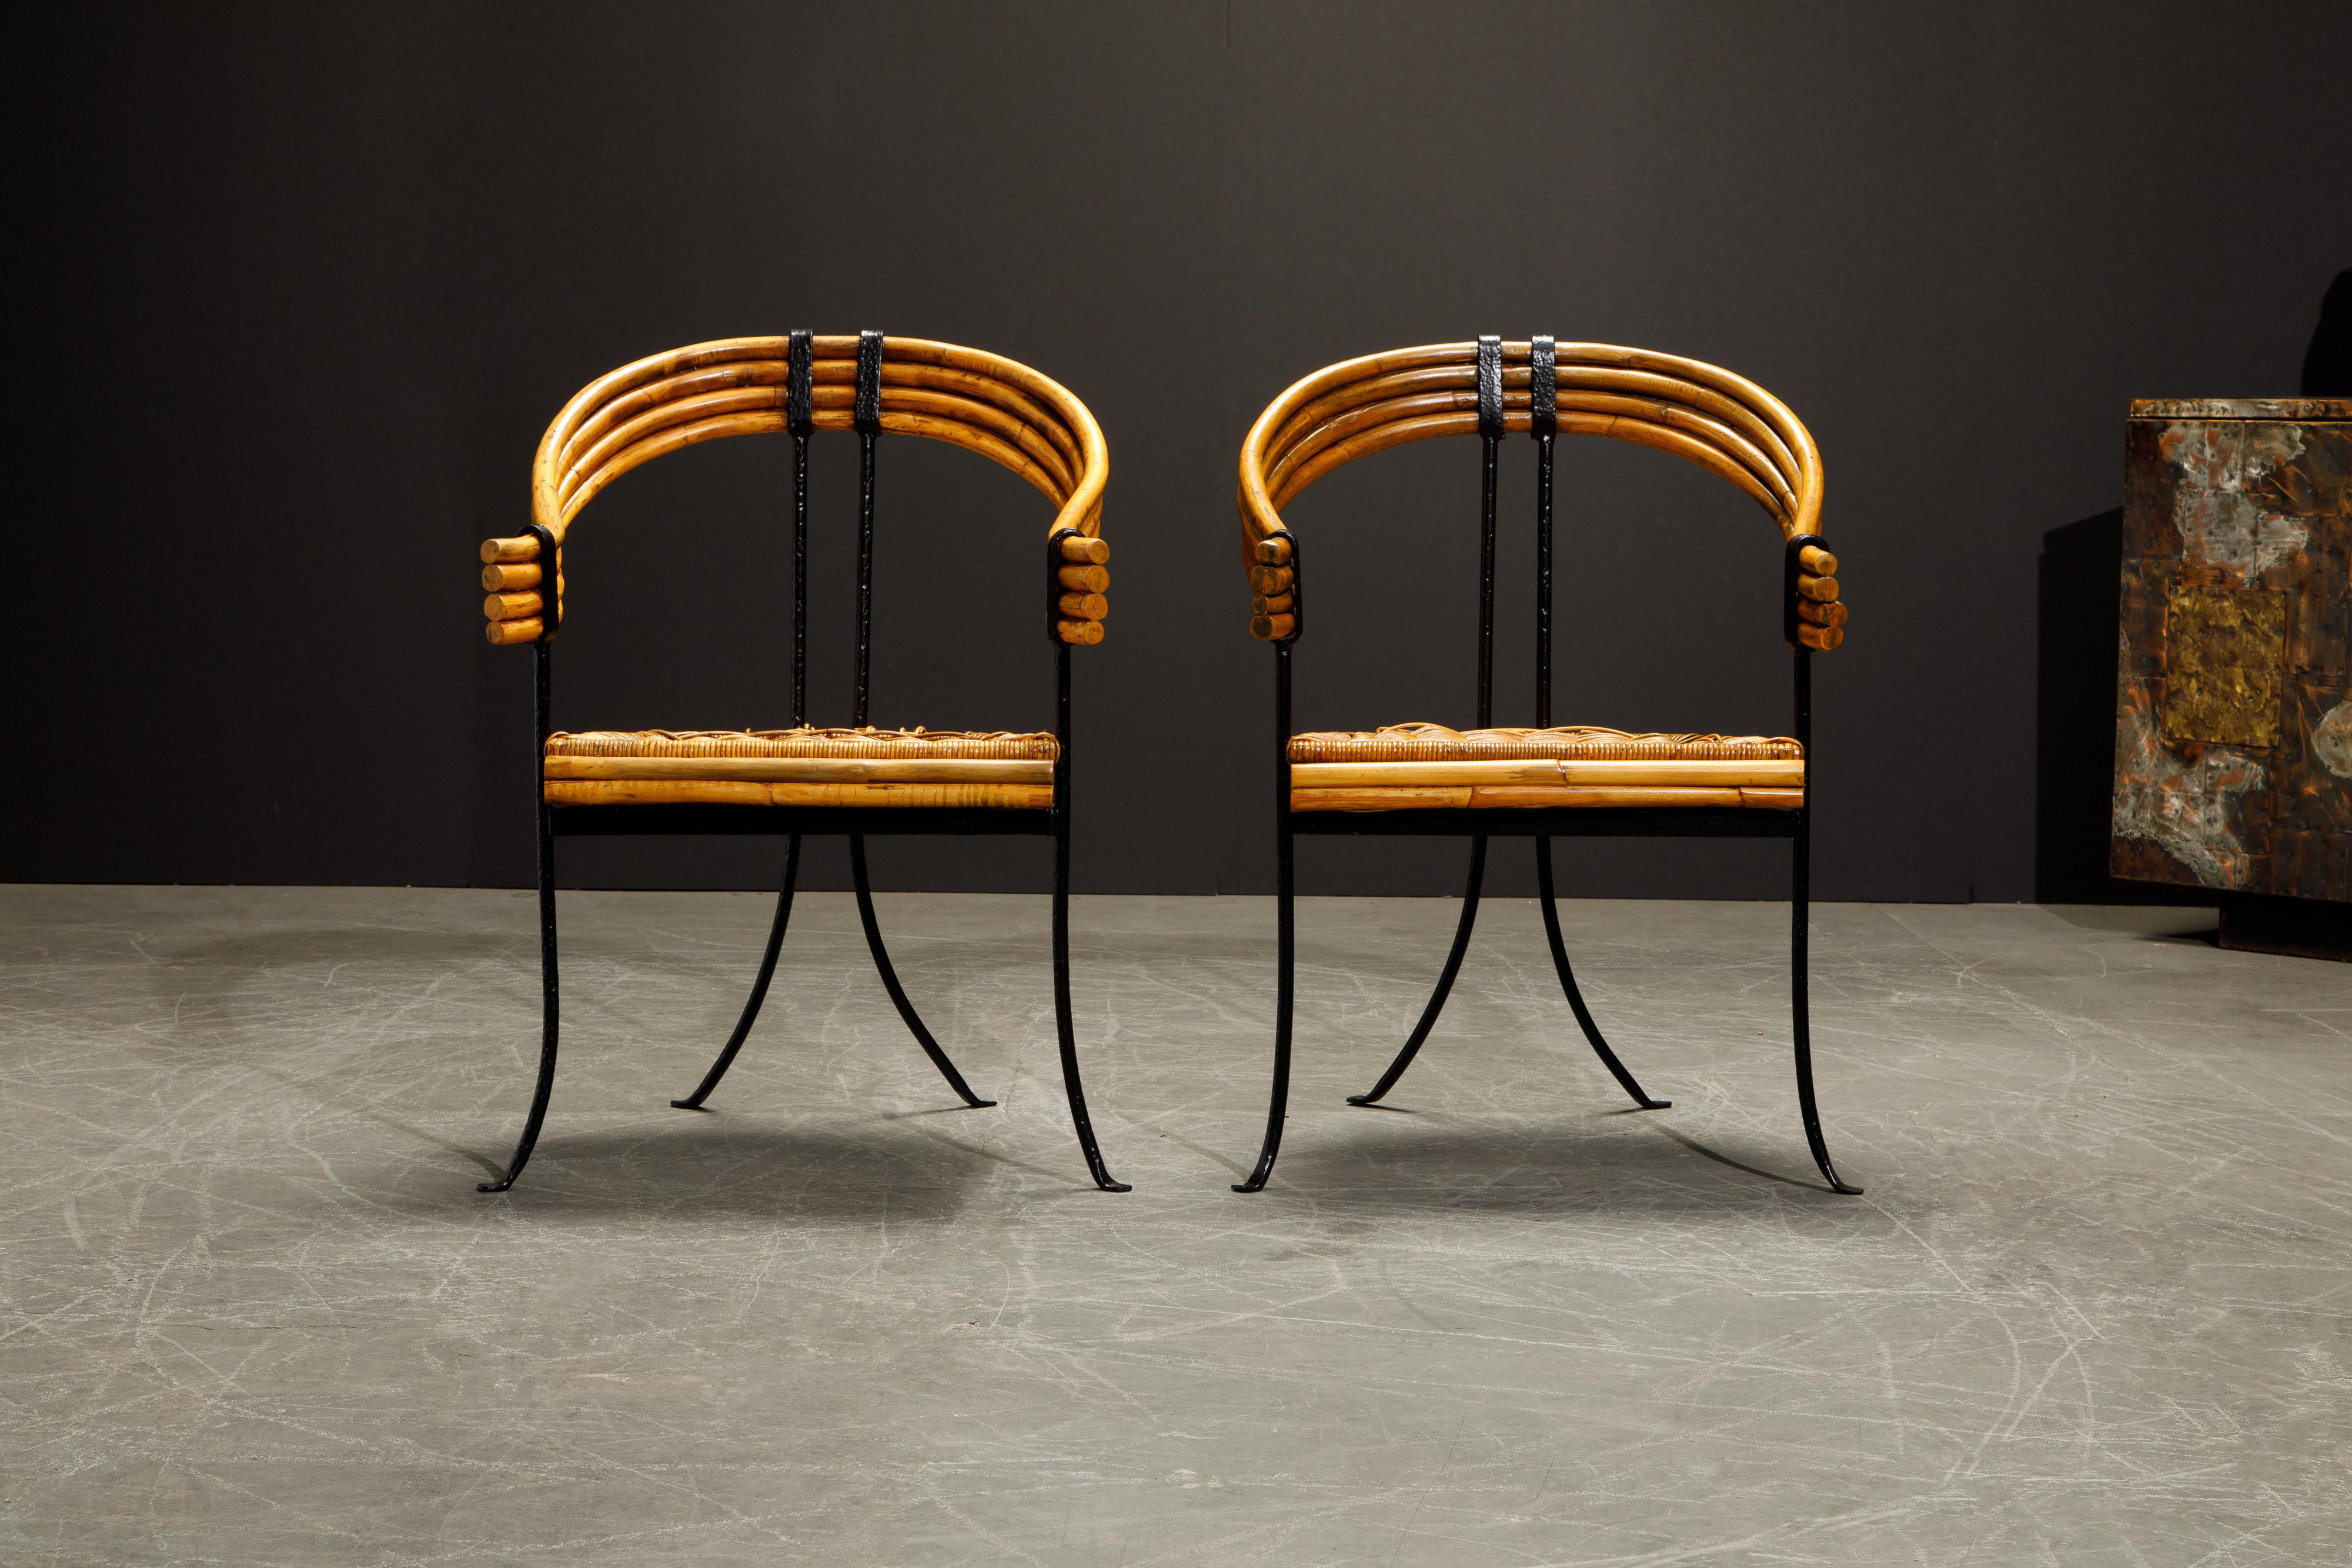 This incredible pair of French Modernist armchairs feature black wrought iron frames with rattan seats and curved bamboo seat backs. The horseshoe shaped bamboo backs provide ample style and character, with the flared black wrought iron legs - these